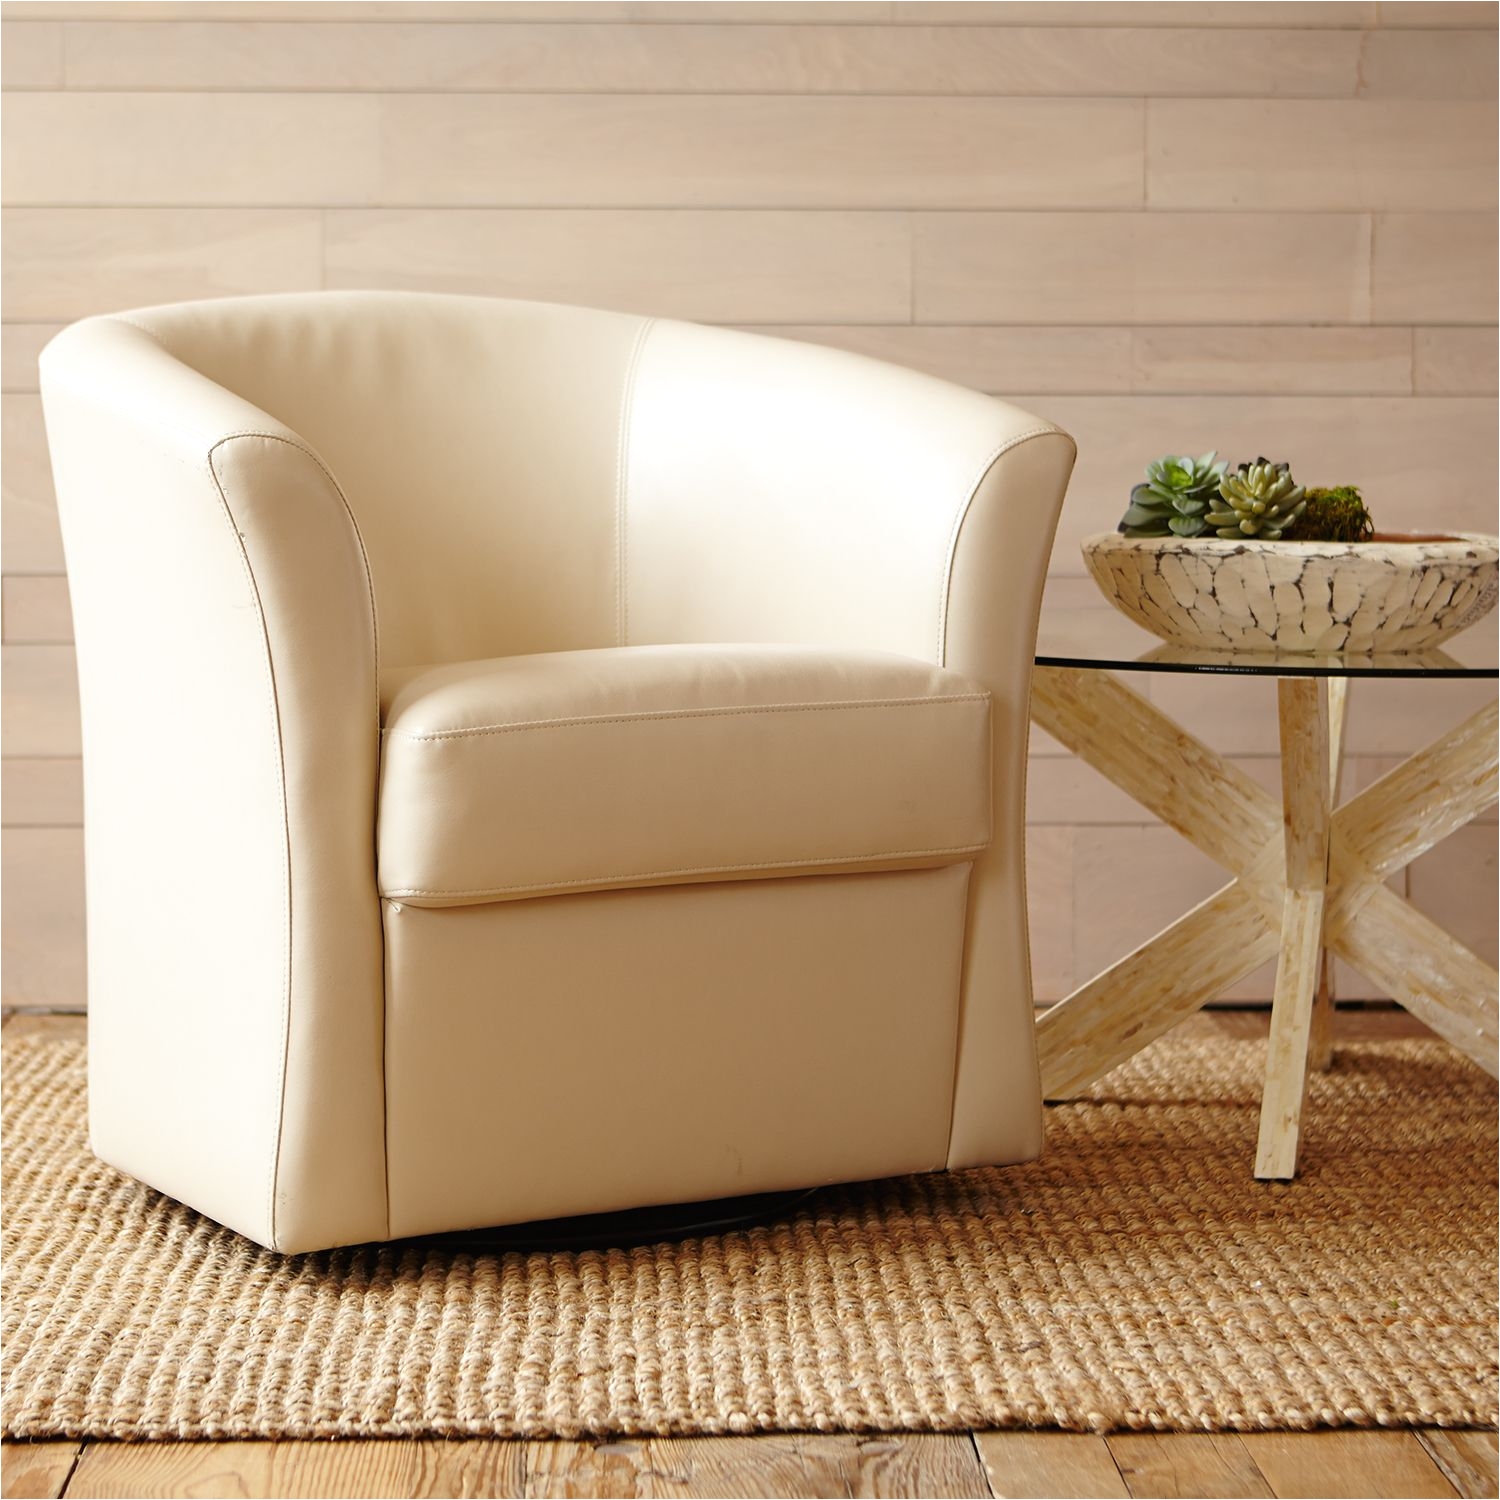 Pier One isaac Swivel Chair Review isaac Ivory Swivel Chair Pier 1 Imports